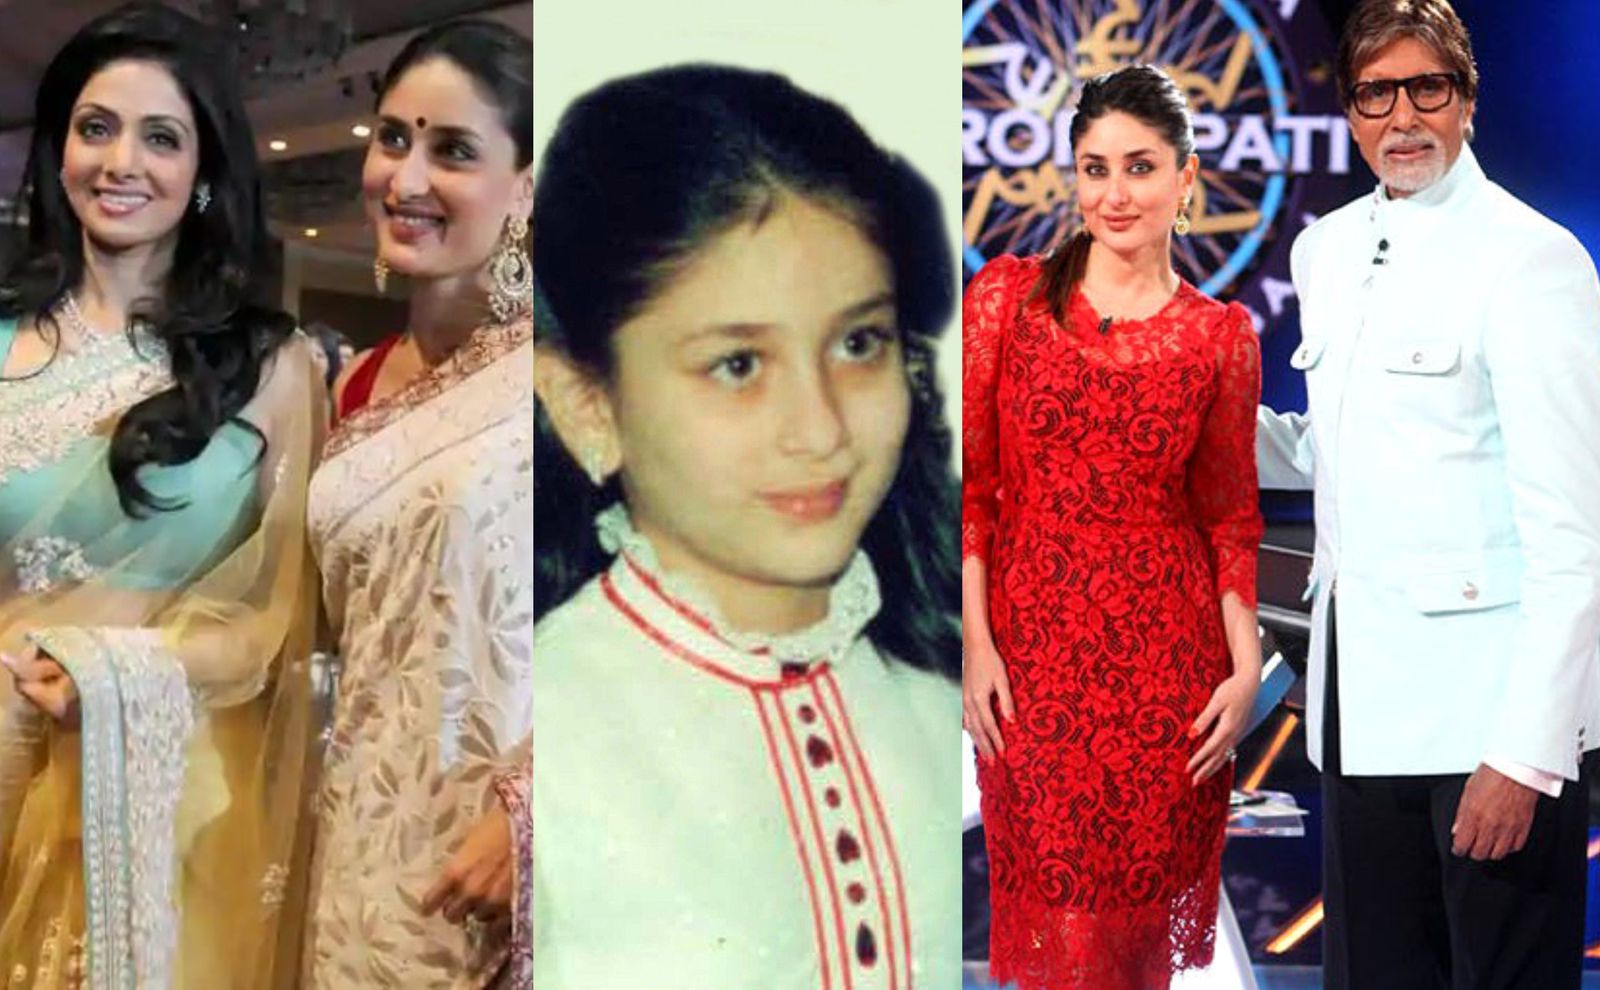 When Kareena Kapoor Said She Wanted Sridevi To Be Her Mom And Amitabh Bachchan To Be Her Dad In A Childhood Interview